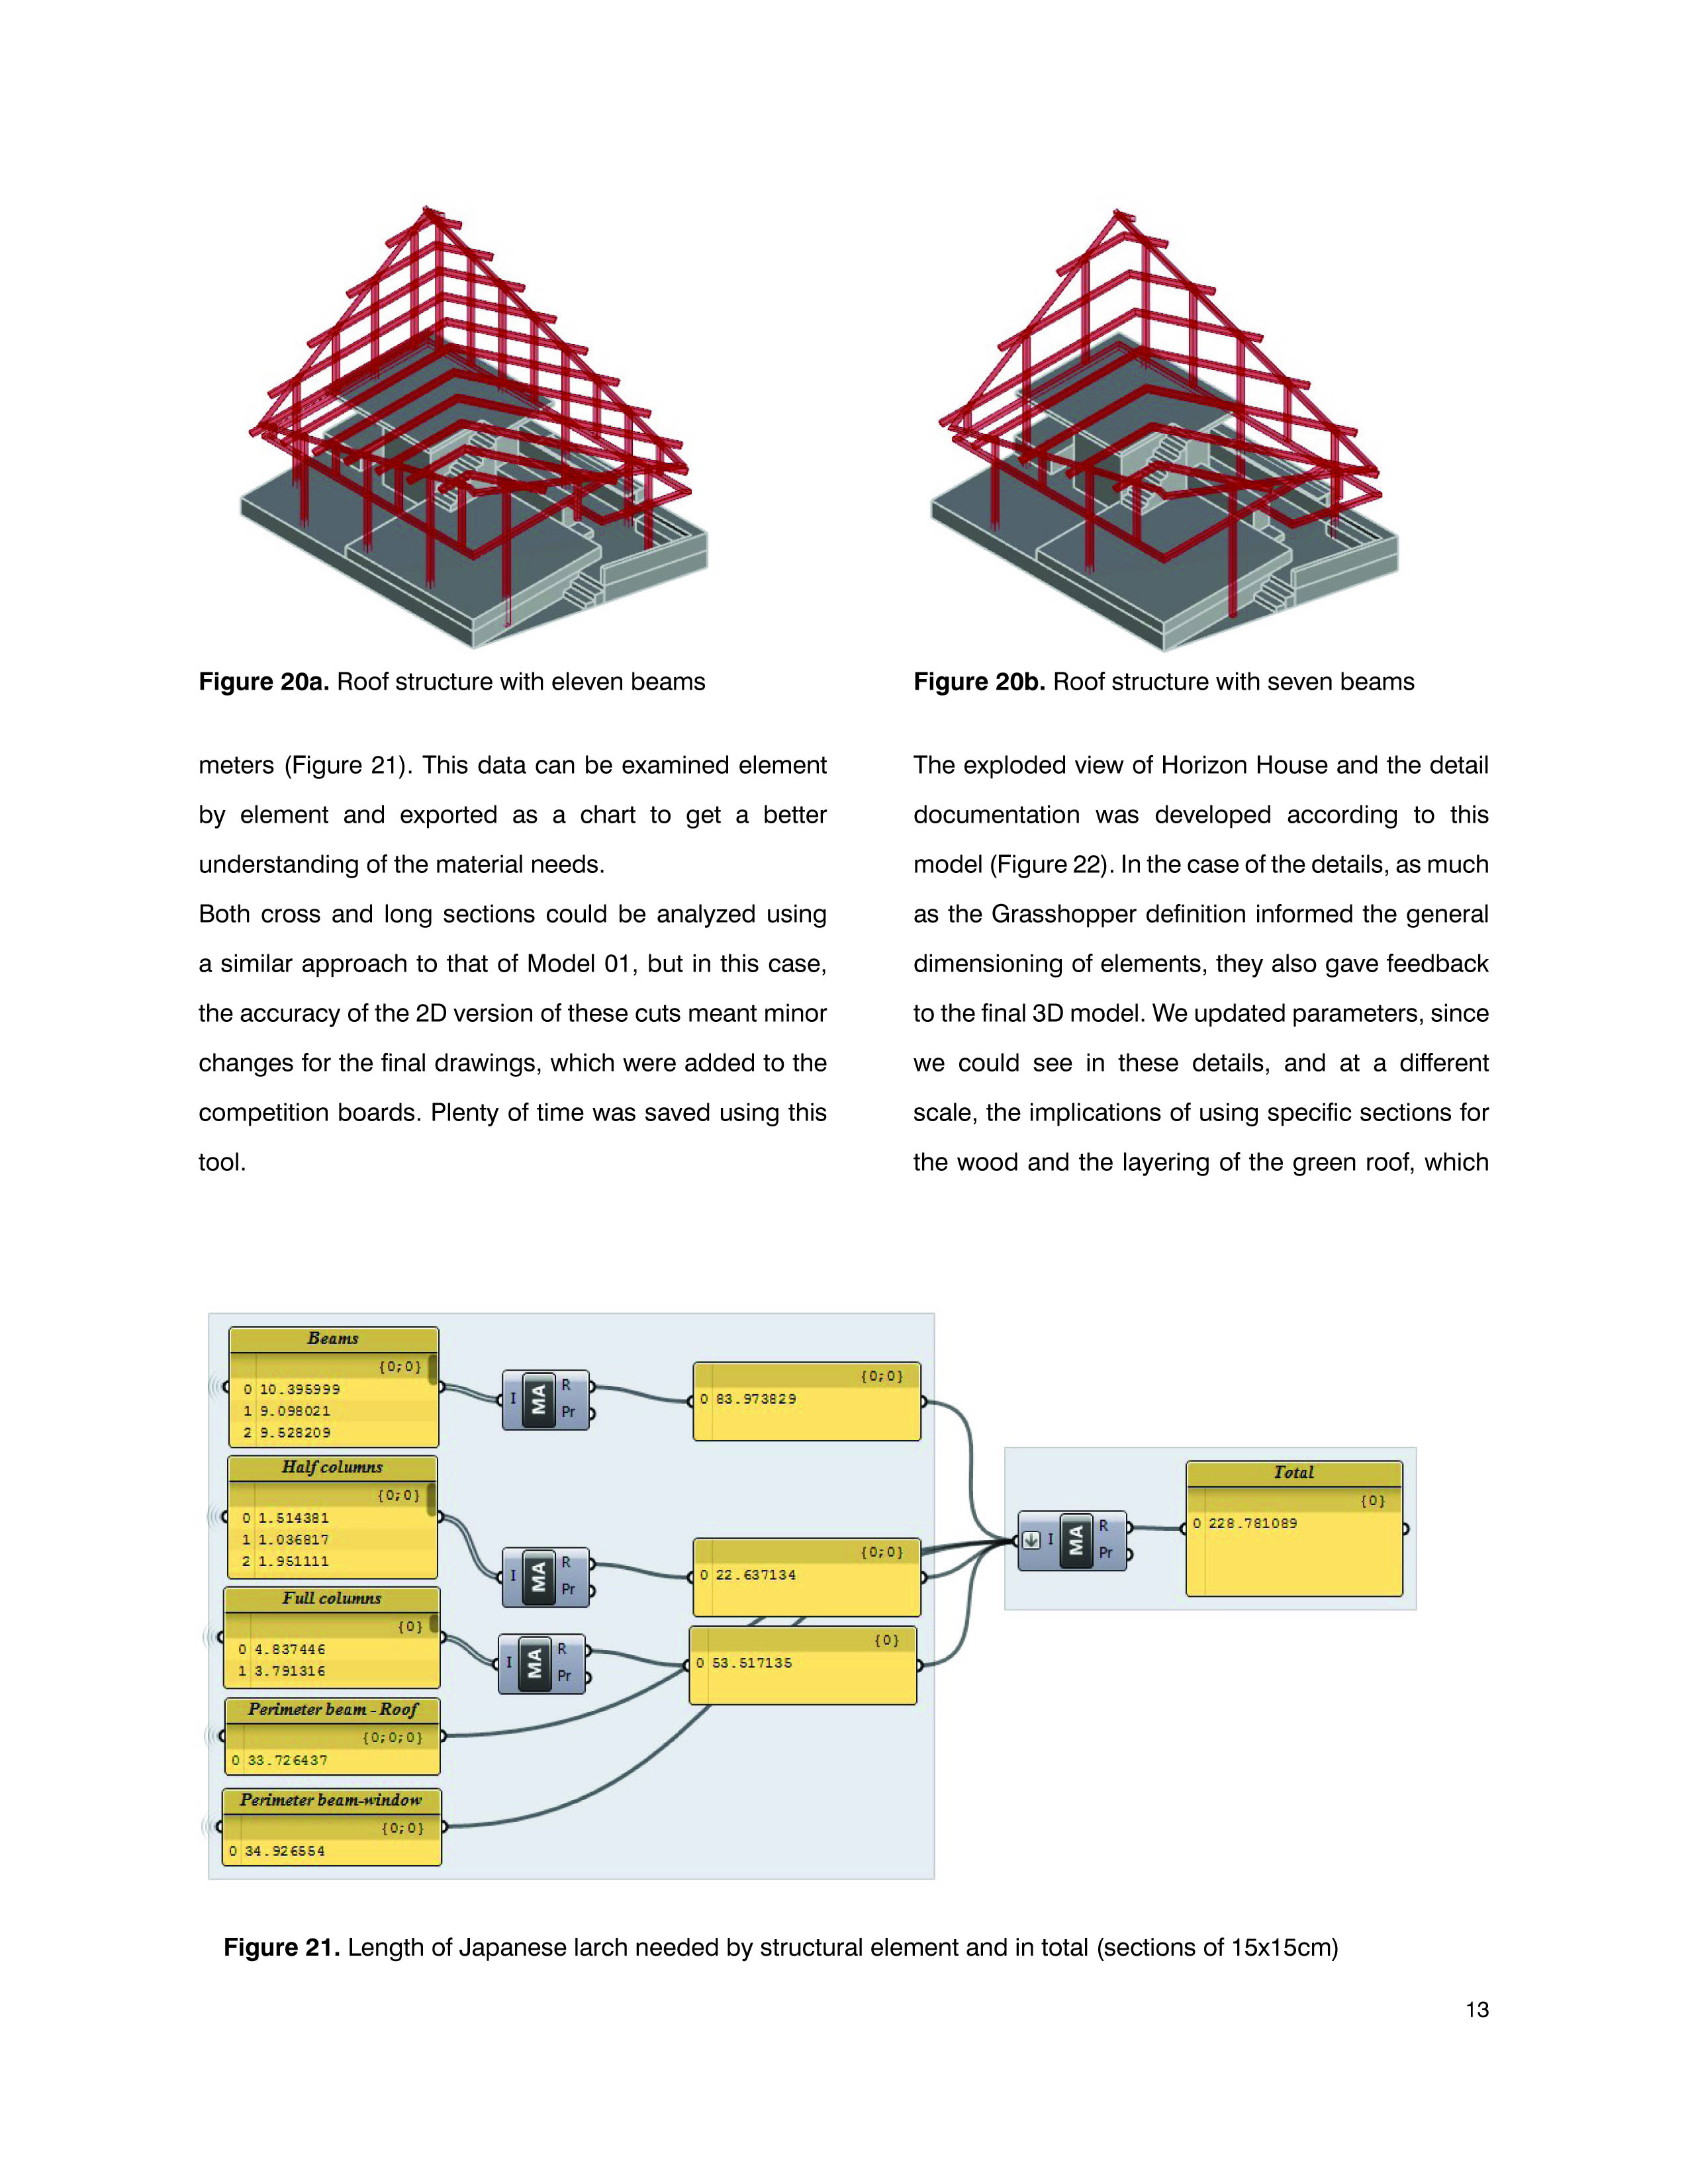 Applications of parametric design tools in Horizon House_Ana Garcia Puyol-Page13